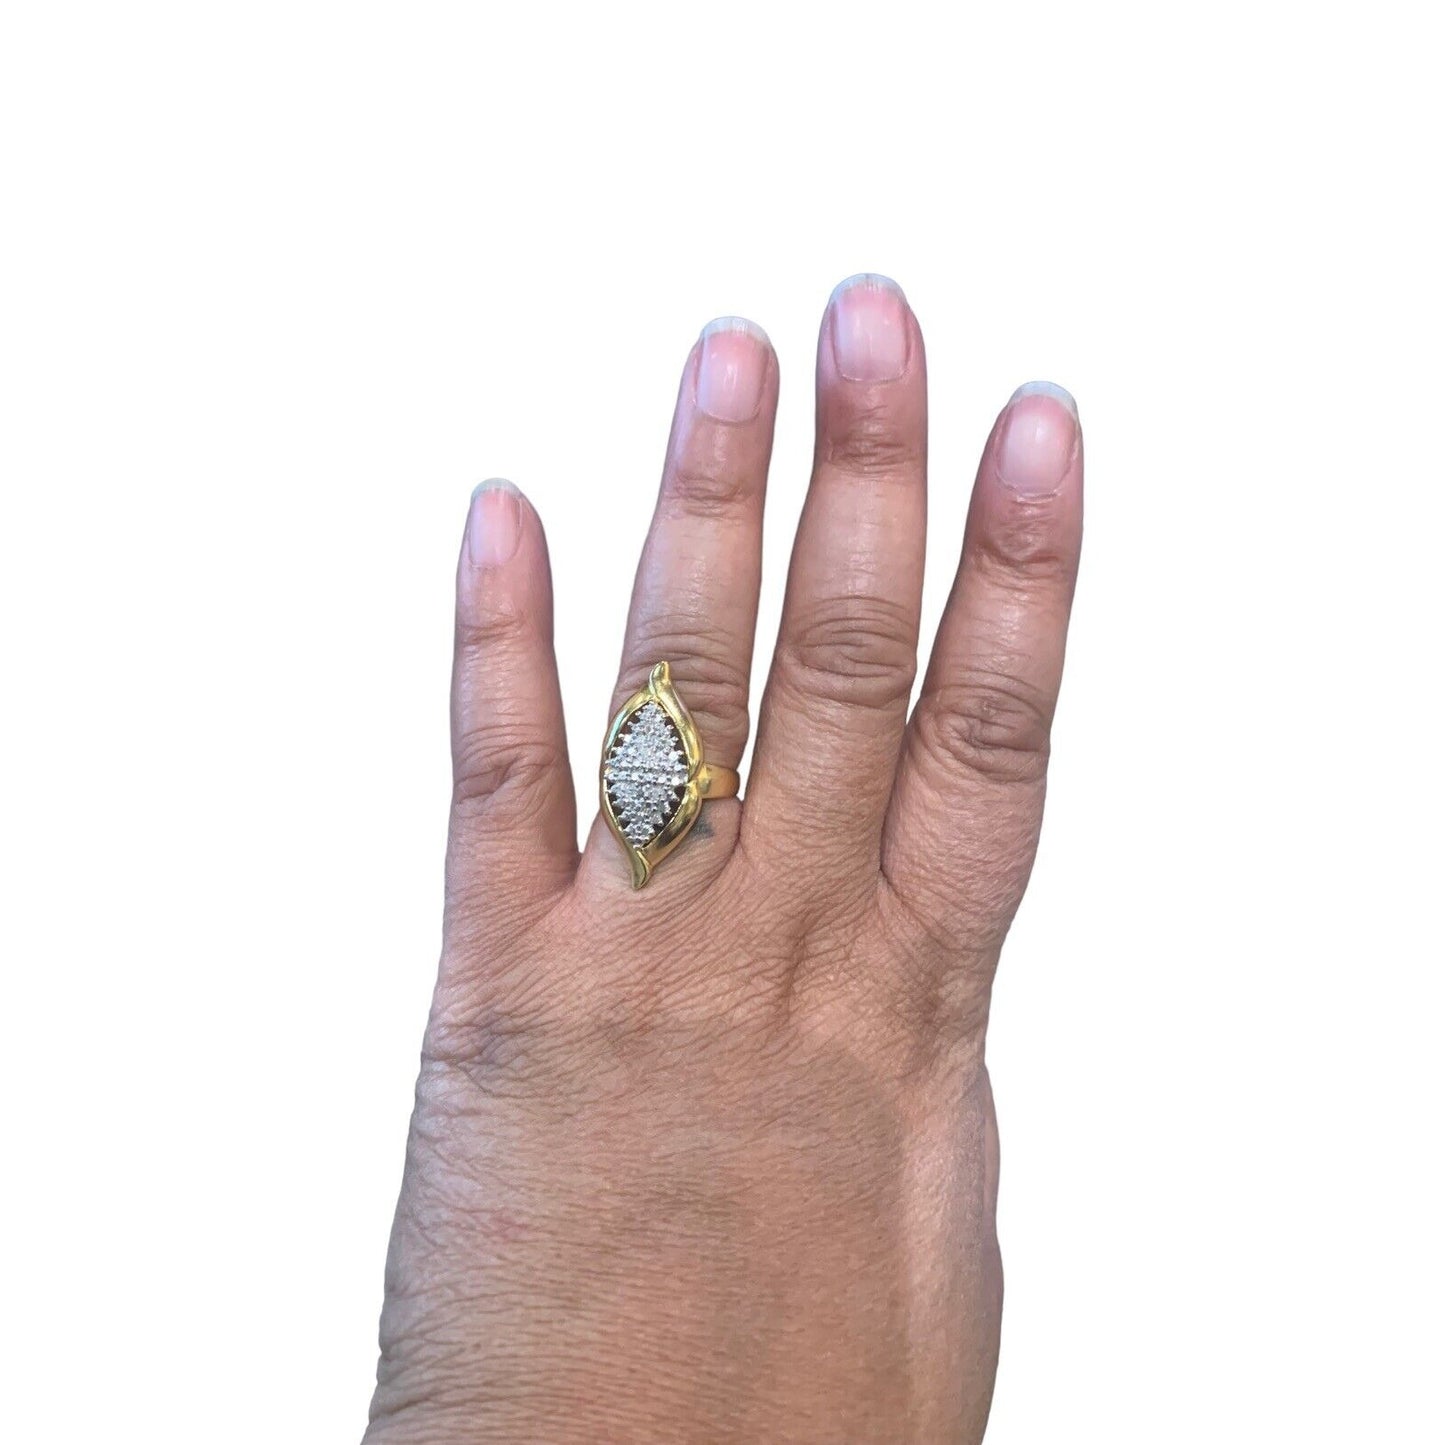 Image Of A Hand Wearing A 18k Gold Over Sterling Silver Diamond Accent Cluster Ring On White Background